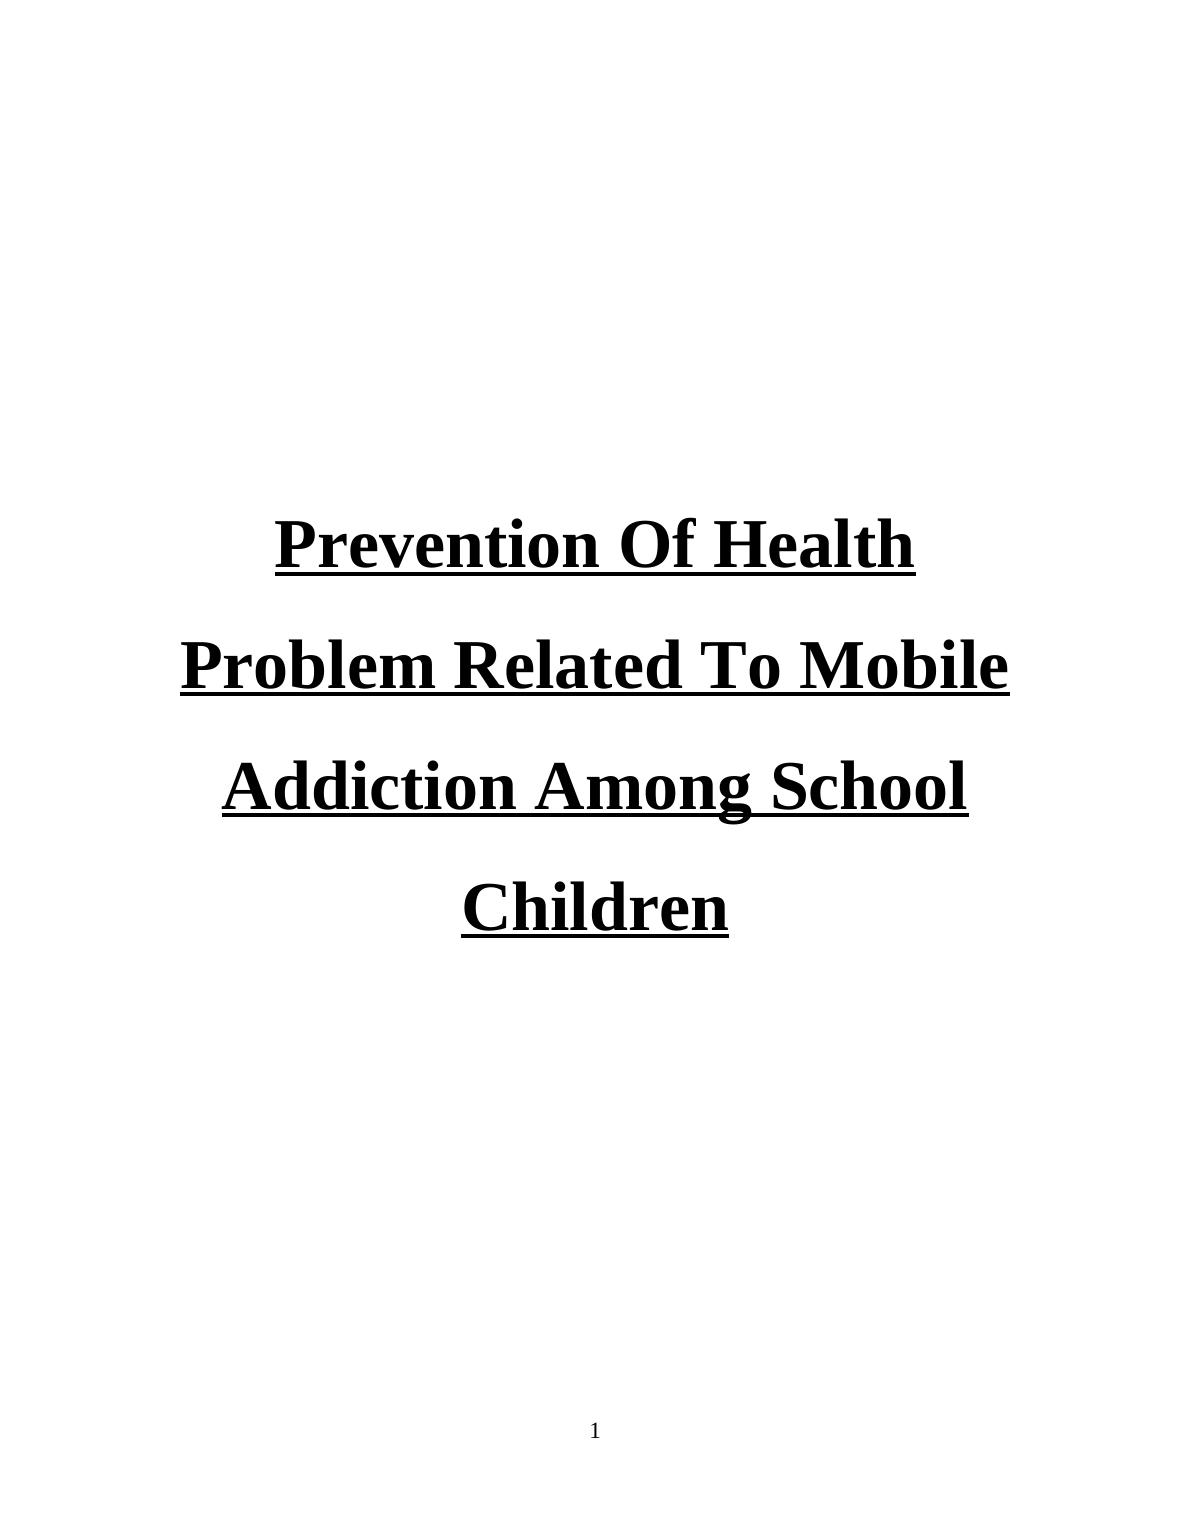 Prevention of Health Problems Related to Mobile Addiction Among School Children_1